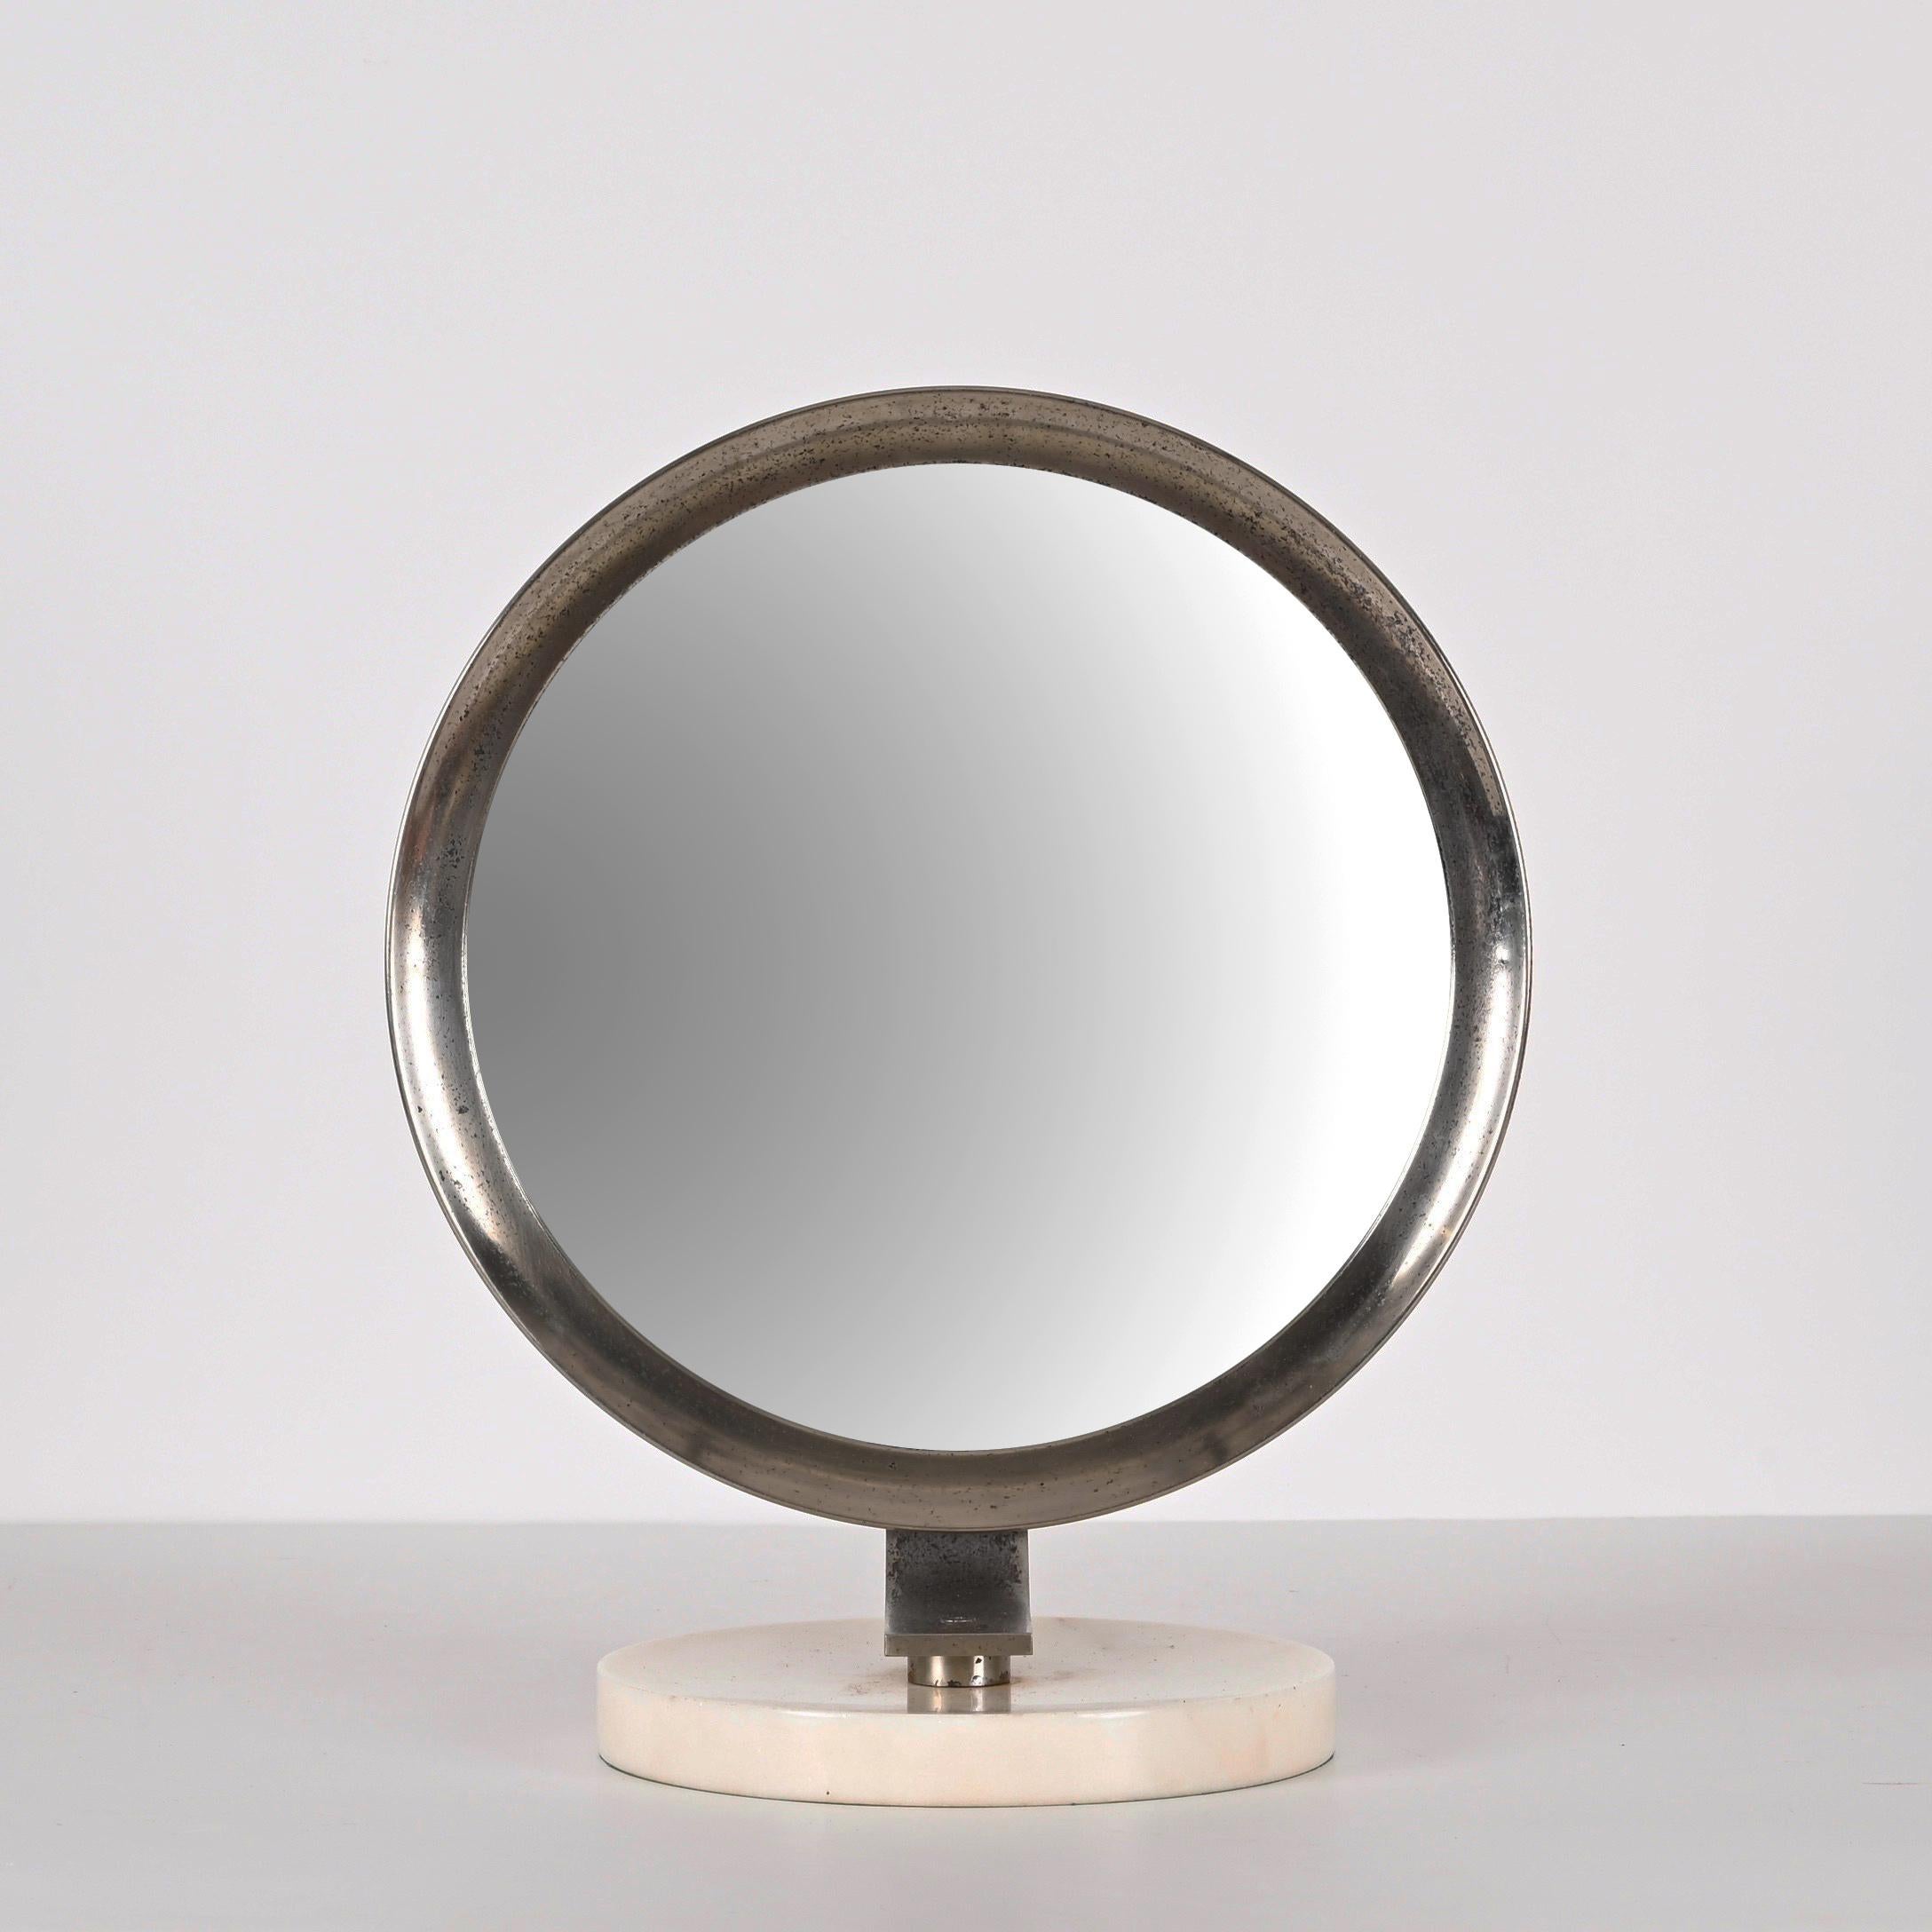 Midcentury Round White Carrara Marble and Steel Italian Dressing Mirror, 1960s For Sale 3